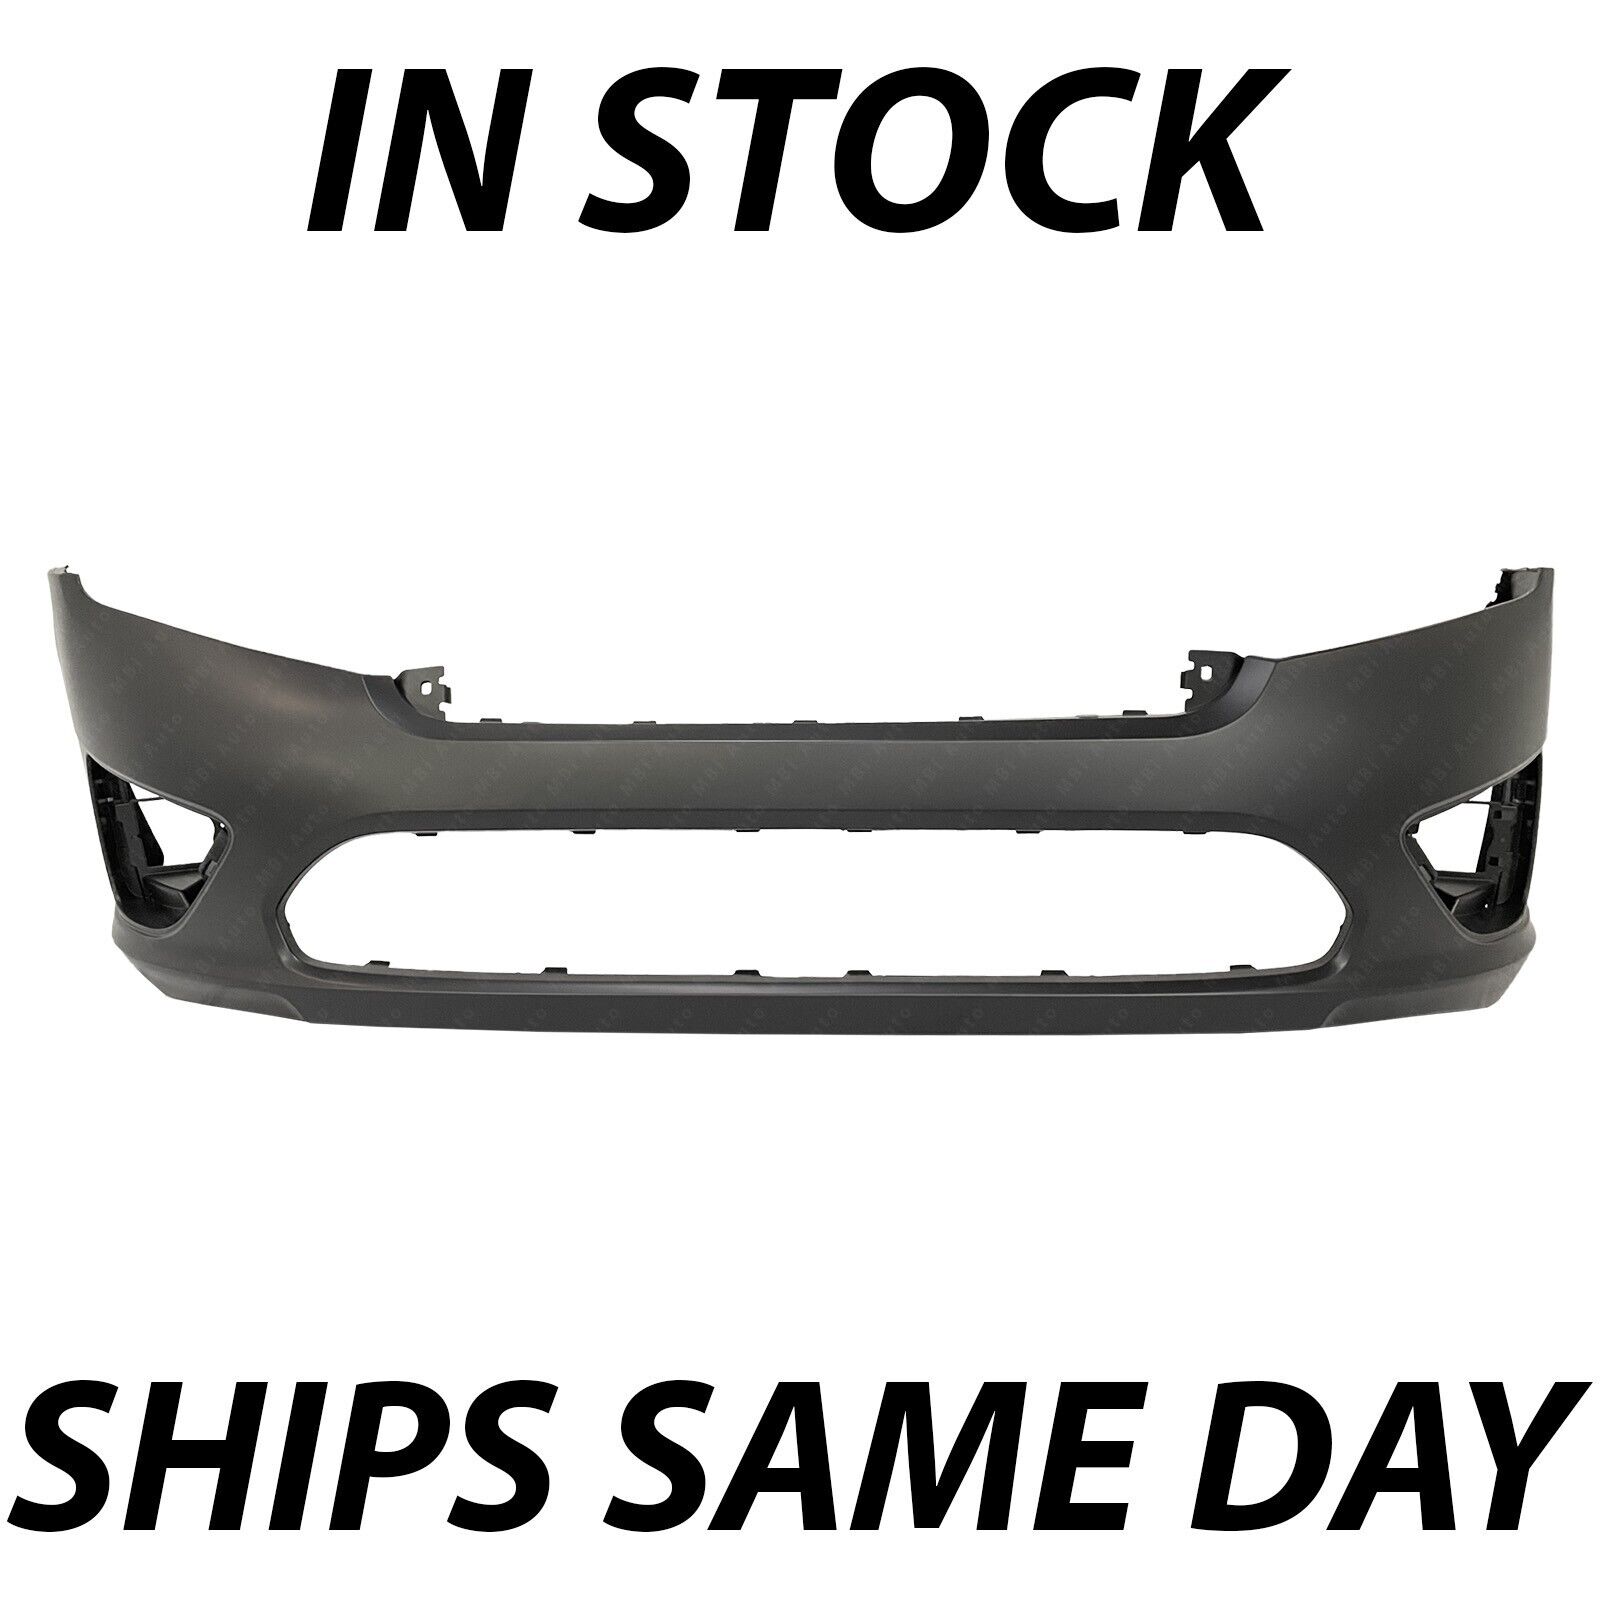 NEW Primered Front Bumper Cover Fascia for 2010 2011 2012 Ford Fusion 10 11 12